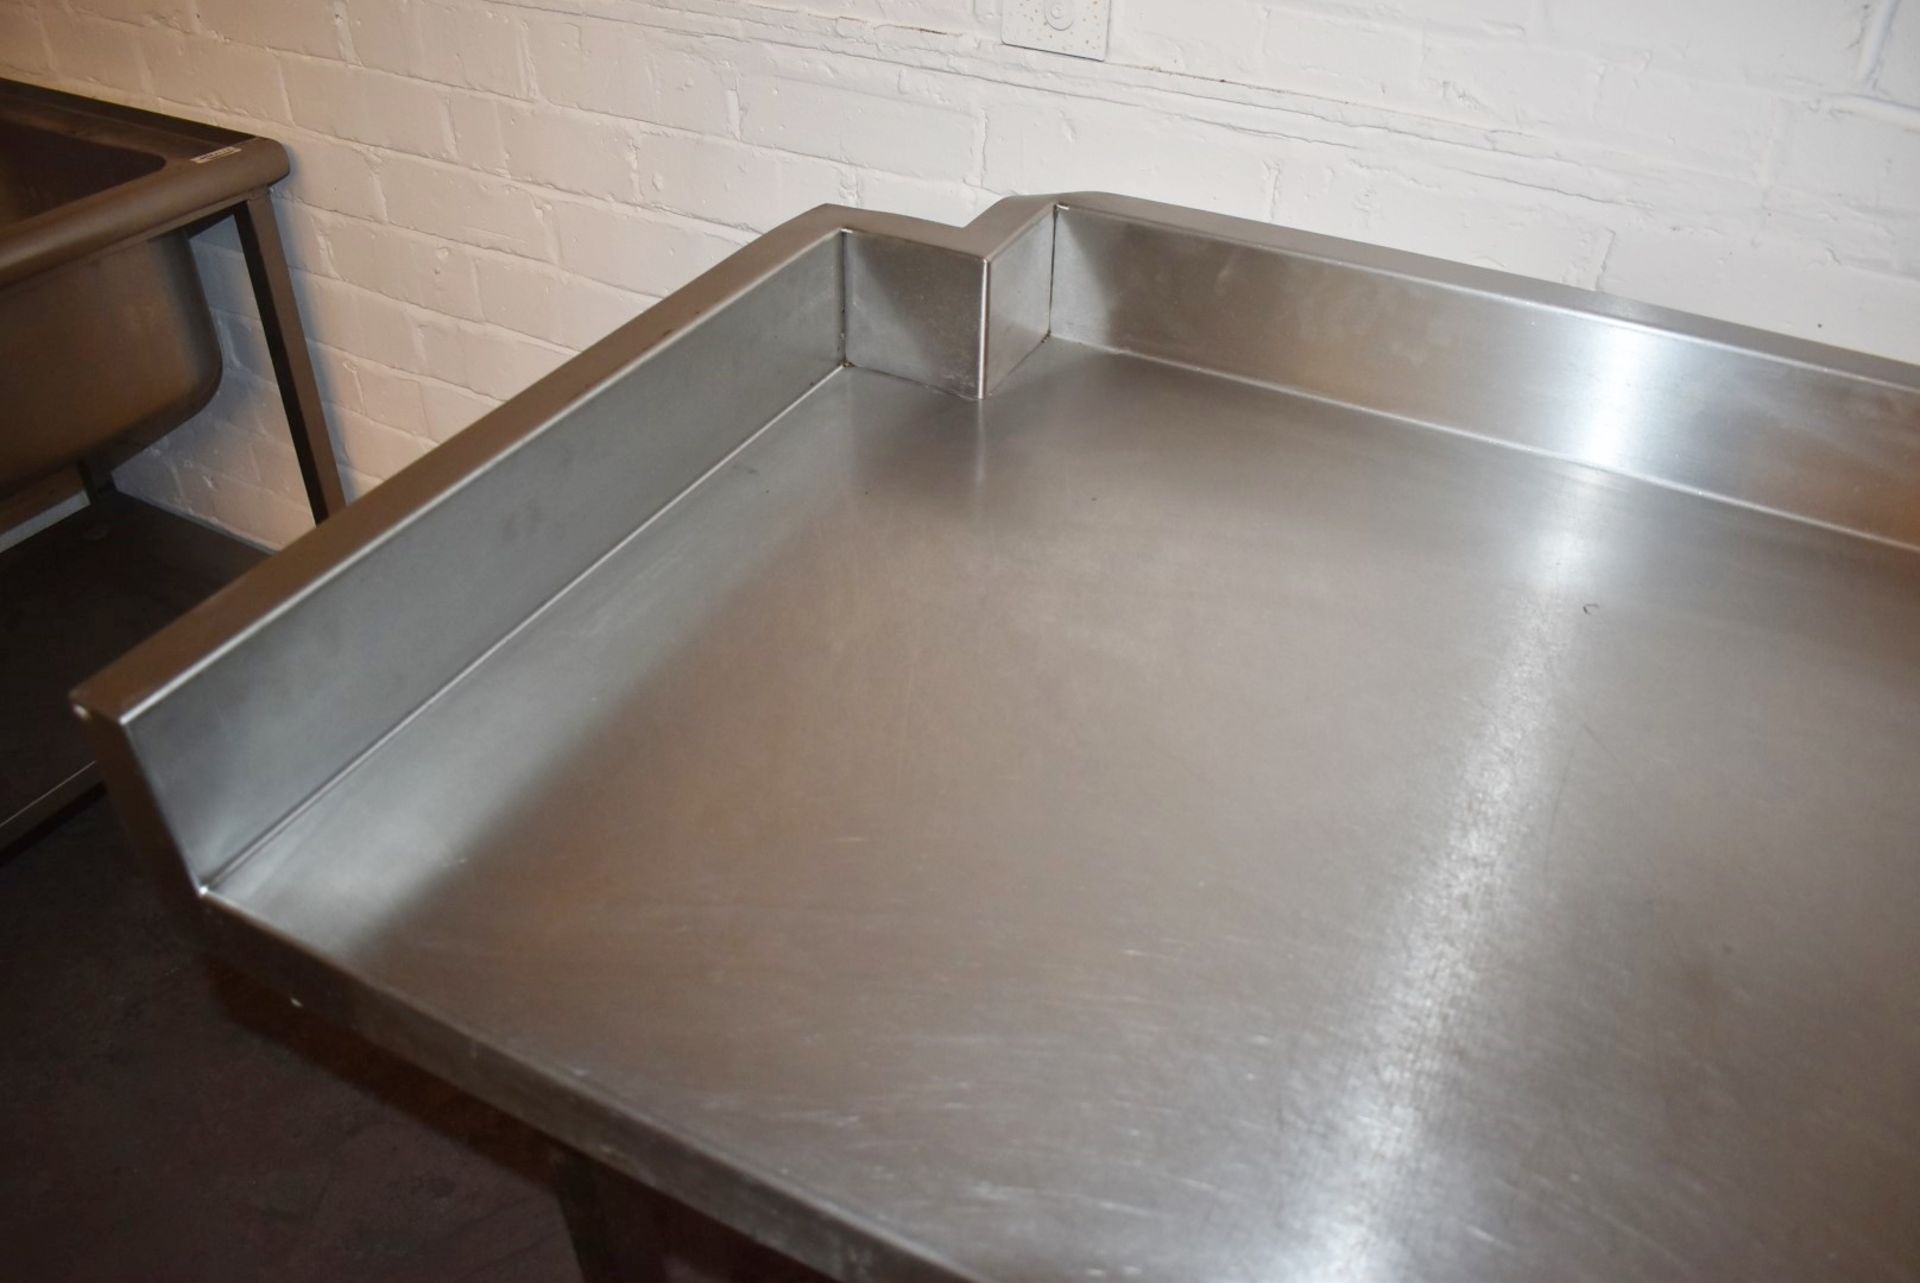 1 x Stainless Steel Prep Bench With Upstand, Undershelf and Castor Wheels - Size: H89 x W200 x D70 - Image 3 of 6